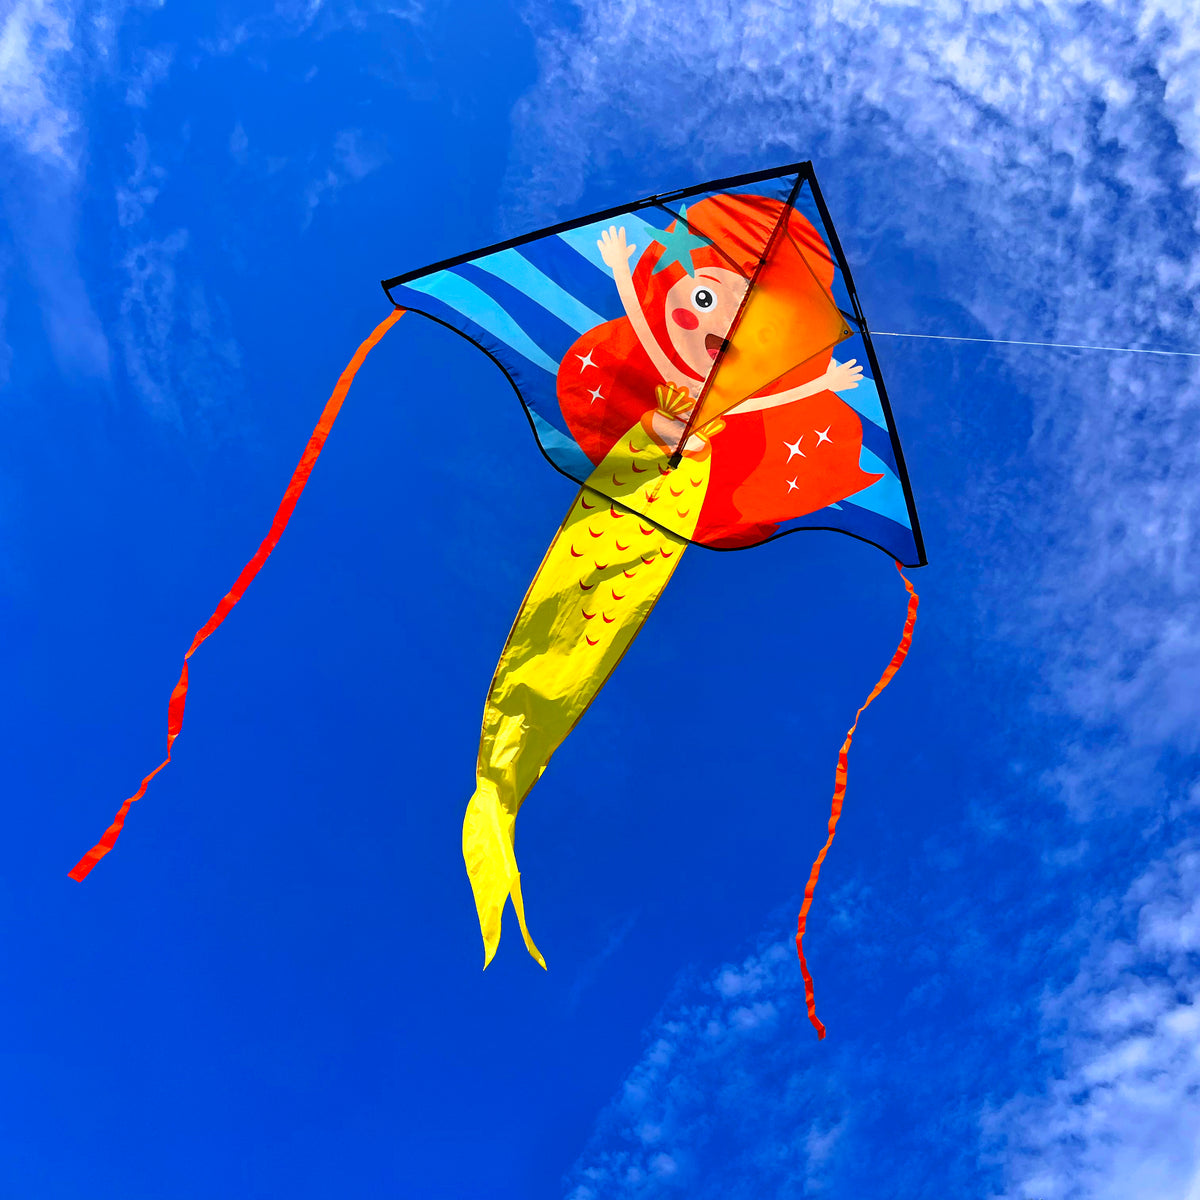  Customer reviews: emma kites Holiday Delta Kite 60-in Kite for  All Beginner Kite Easy to Fly Simple to Assemble Fun Activities for Kids  and Adults to Enjoy Outings at Beach Park (